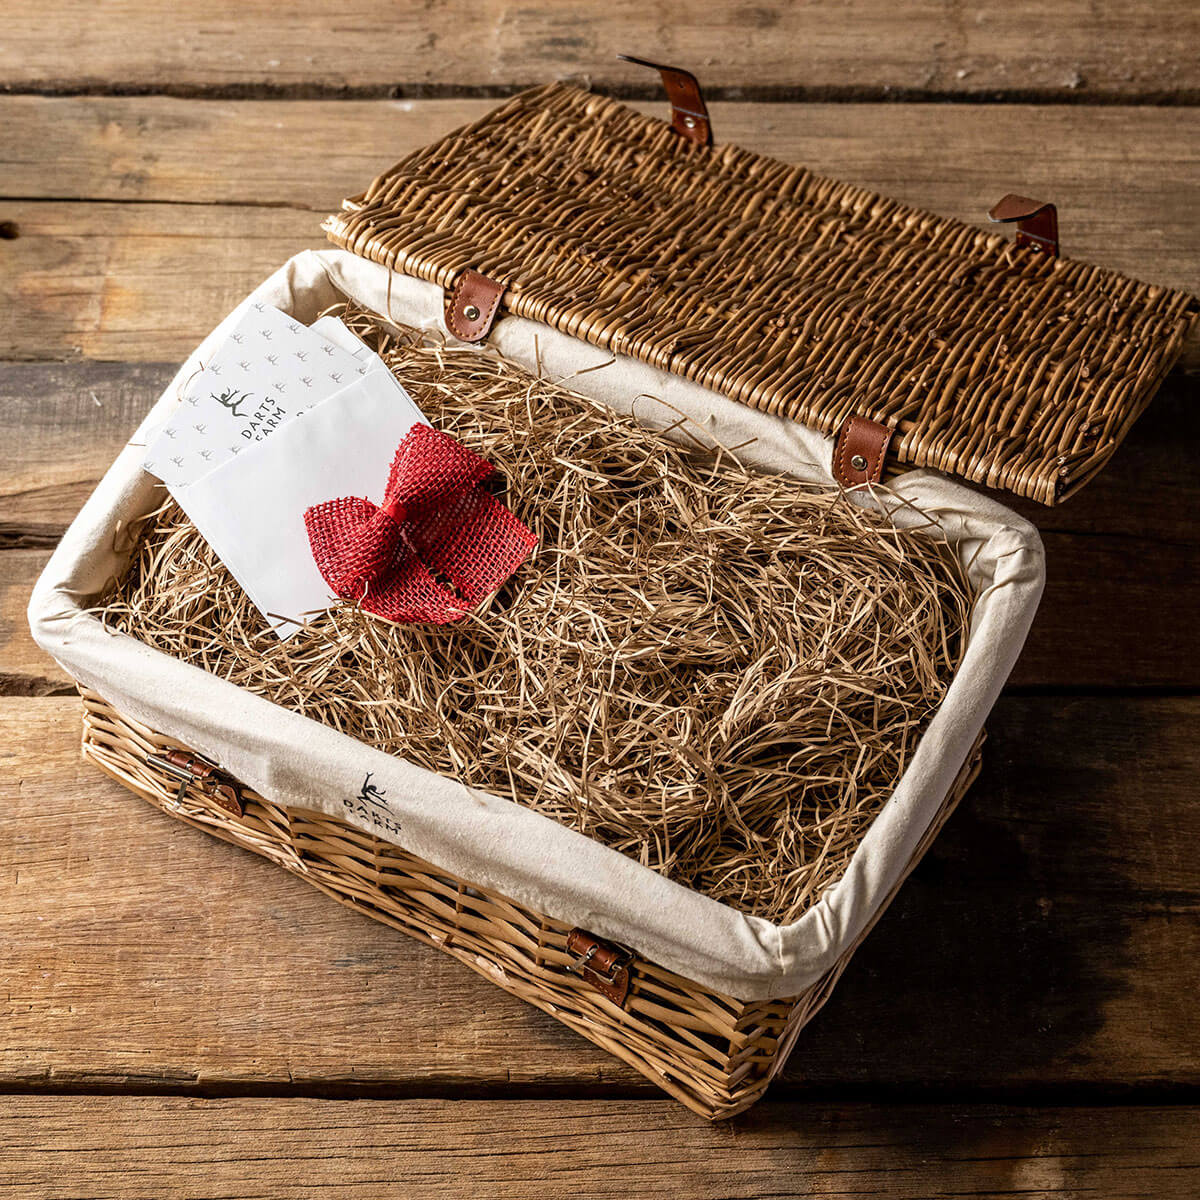 For Her - With Love Hamper